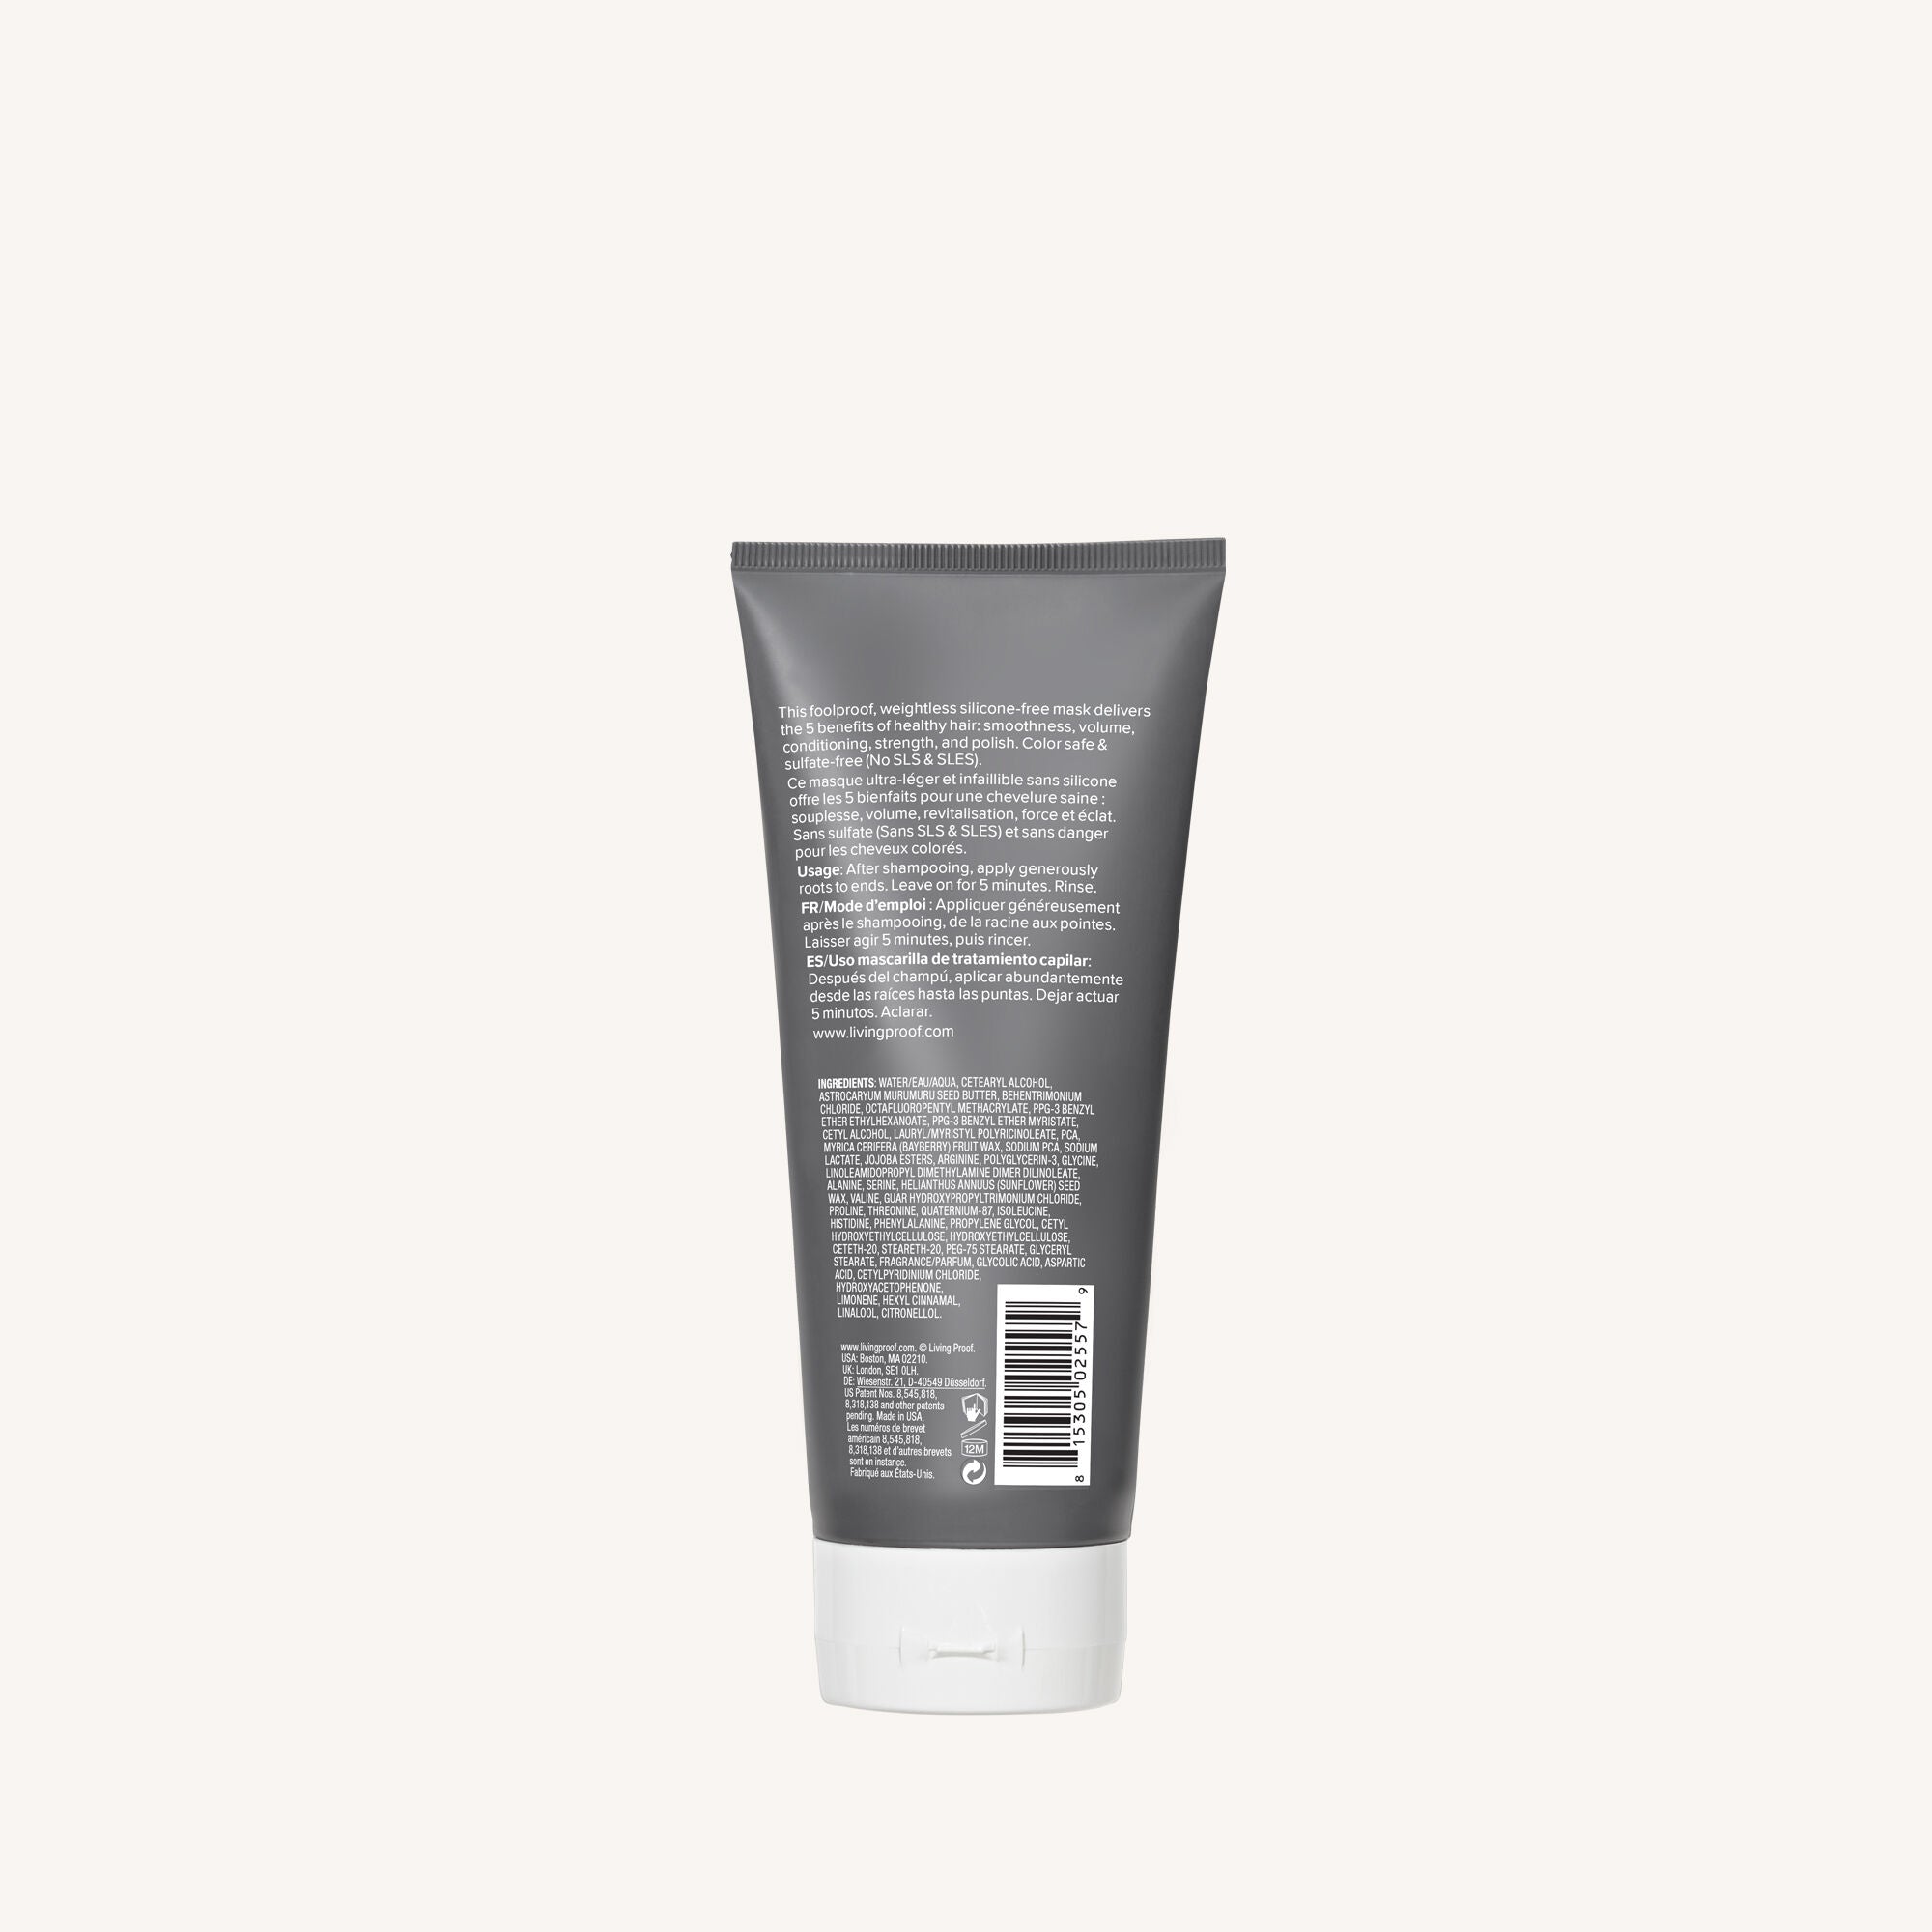 Perfect hair Day (PhD) Weightless Mask